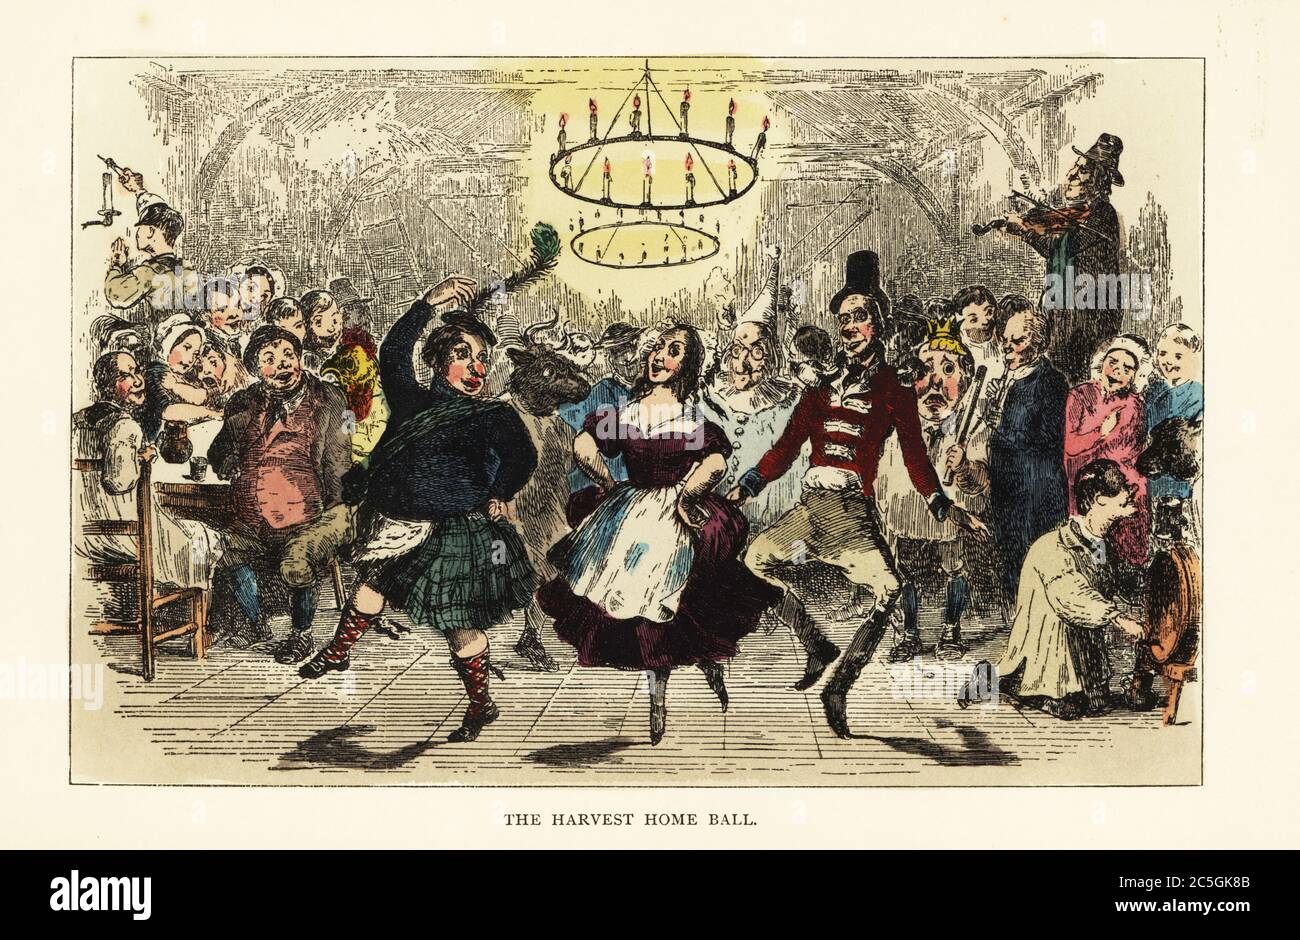 Peasants and farmers dancing at a harvest festival in a barn with rustic chandeliers, 19th century. Jorrocks as a Scotsman in a kilt, a man in a soldier’s uniform, others as clowns, cows and Humpty Dumpty. The Harvest Home Ball. Handcoloured steel engraving after an illustration by Wildrake, Heath or Jellicoe from Robert Smith Surtees’ Hillingdon Hall, or the Cockney Squire, a Tale of Country Life, John C. Nimmo., London, 1844. Stock Photo